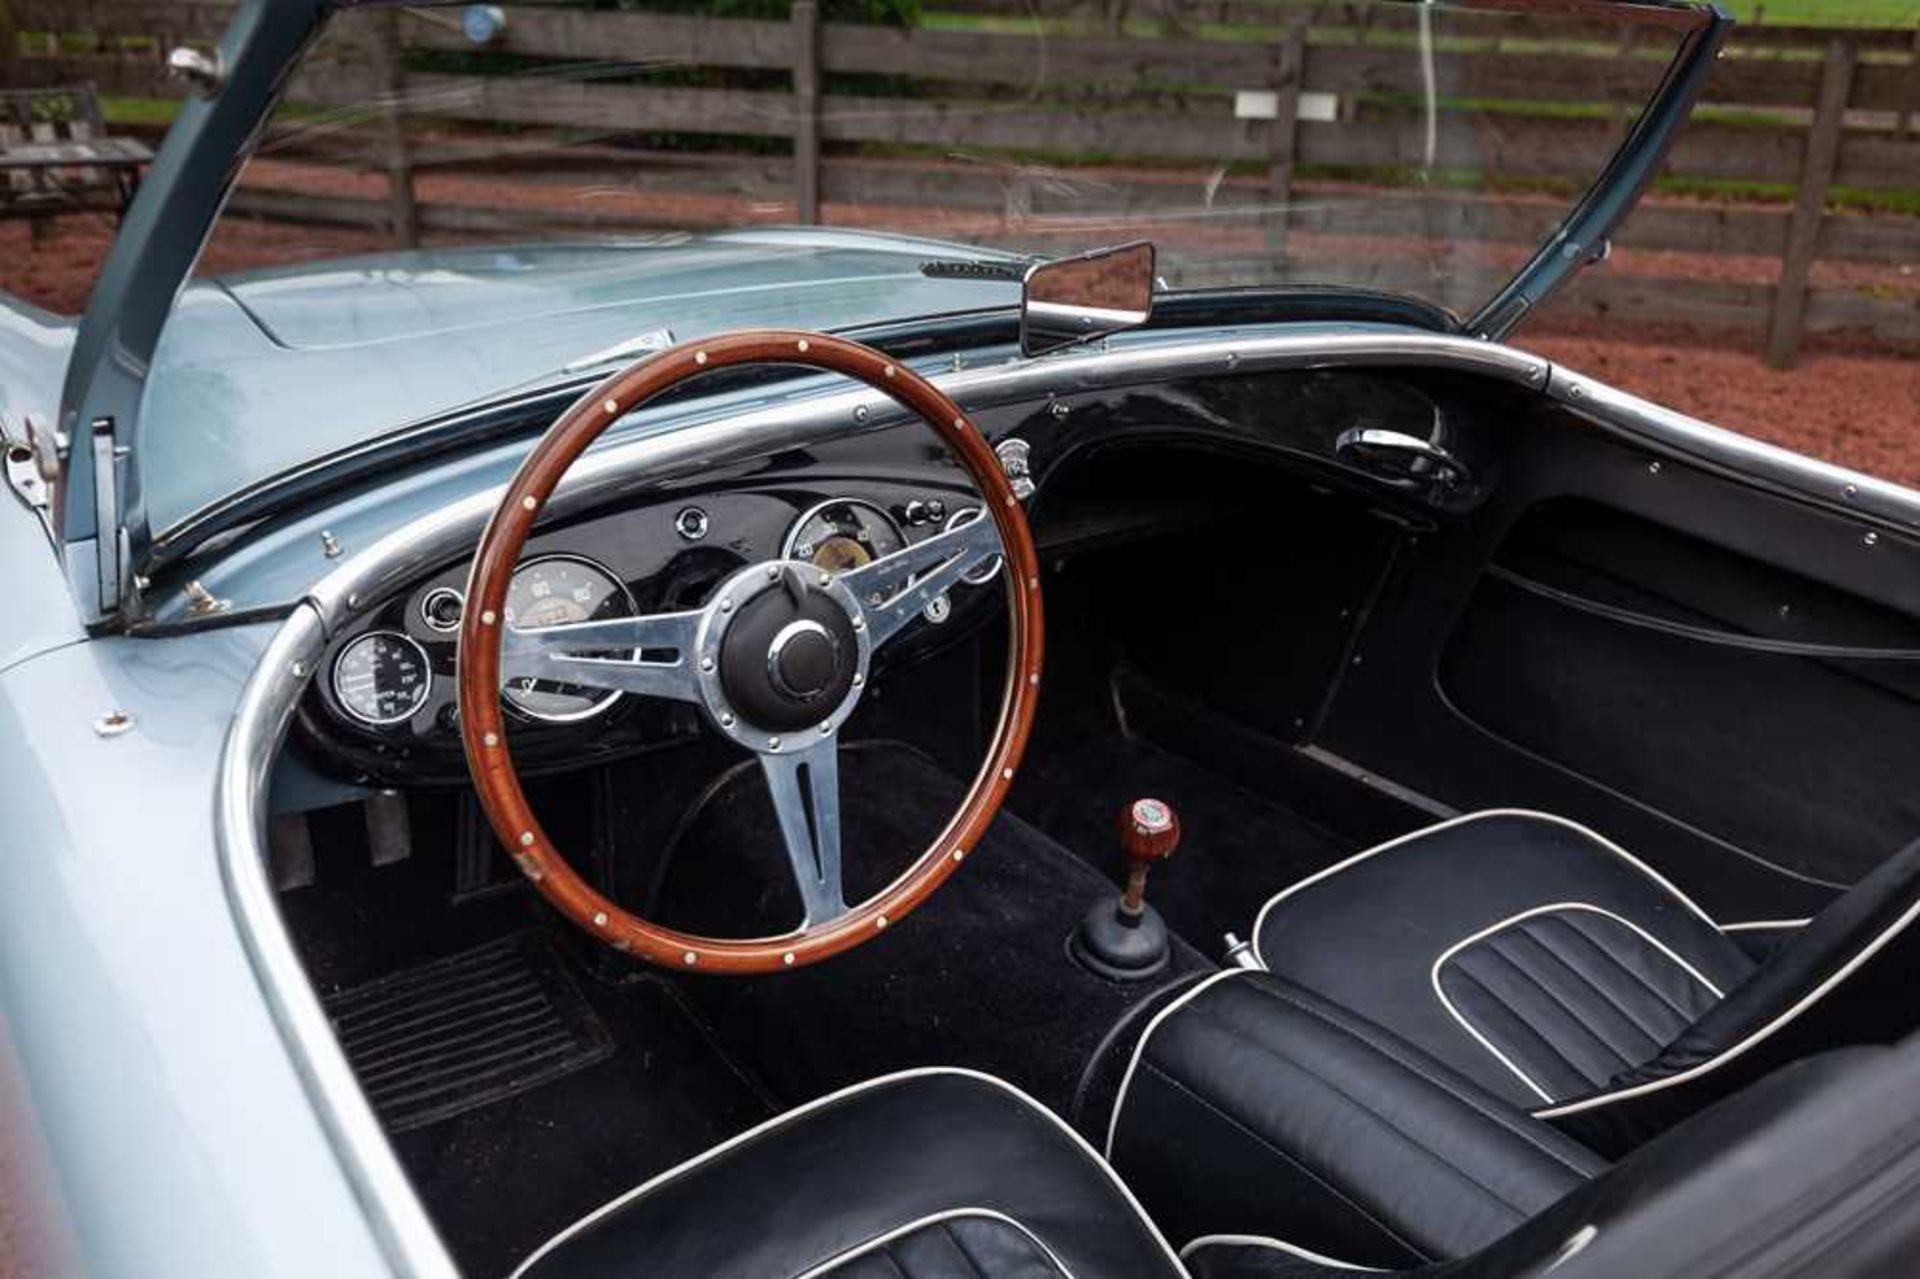 1955 Austin-Healey 100/4 Subtly Upgraded with 5-Speed Transmission and Front Disc Brakes - Image 27 of 54